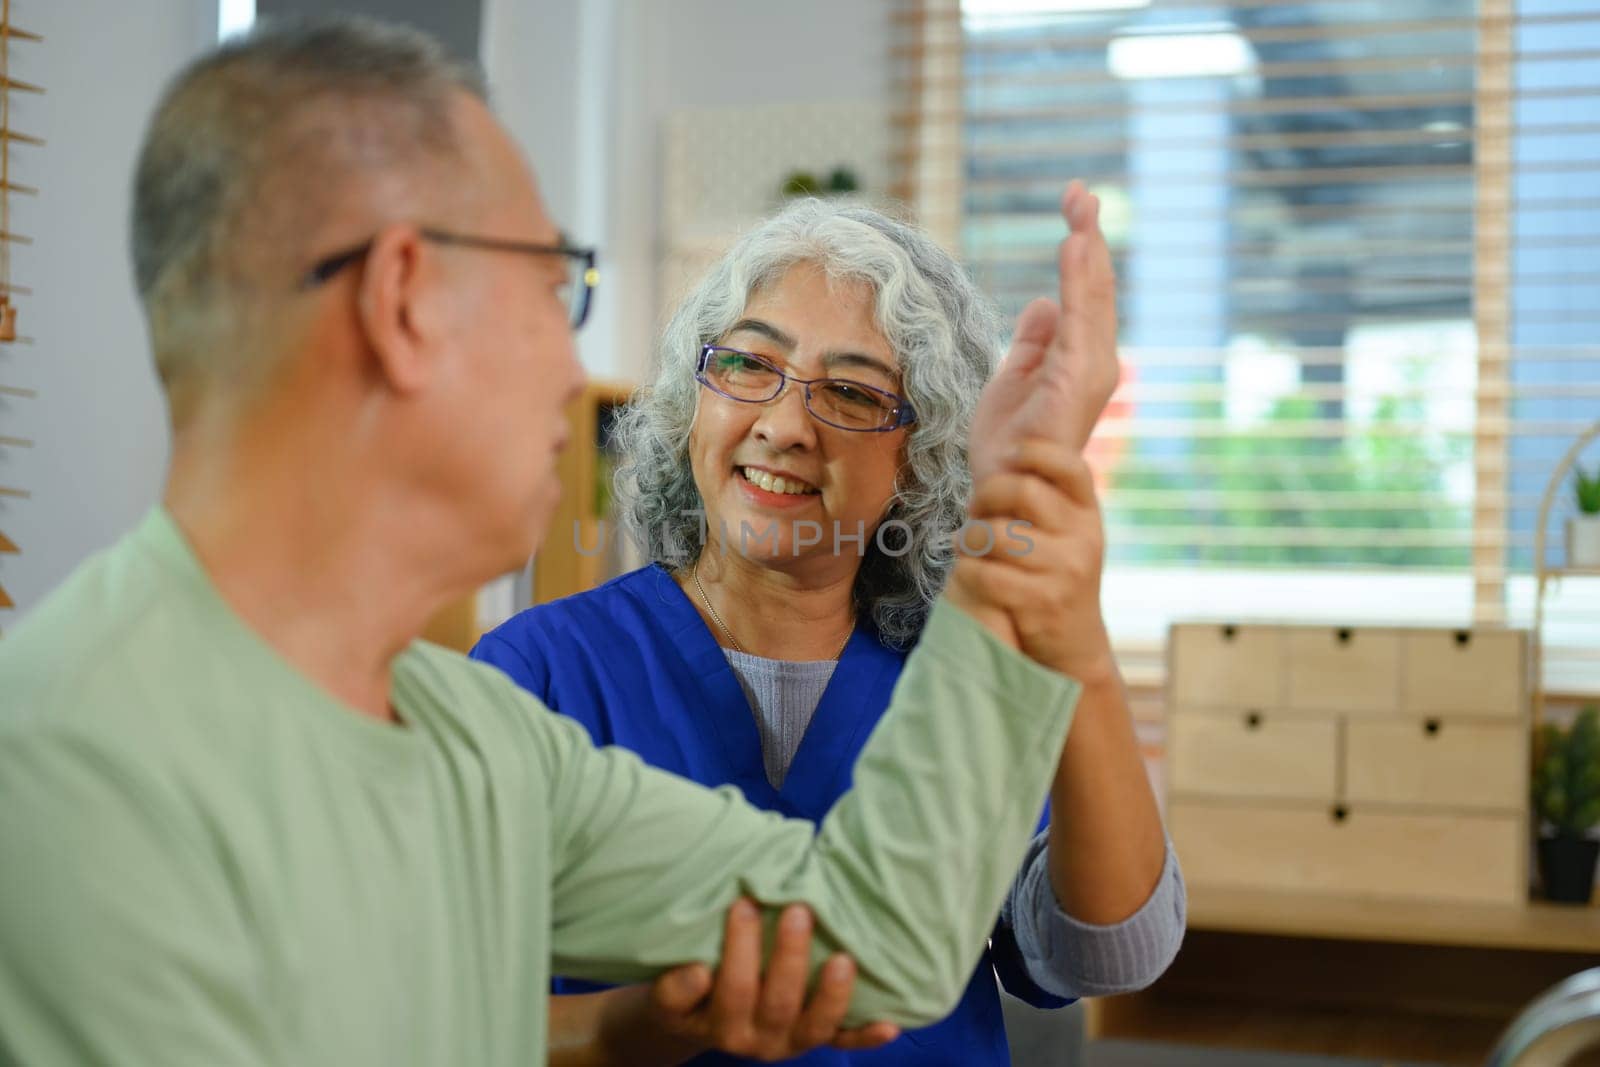 Caring nurse helping senior man with physical therapy at home. Healthcare concept.